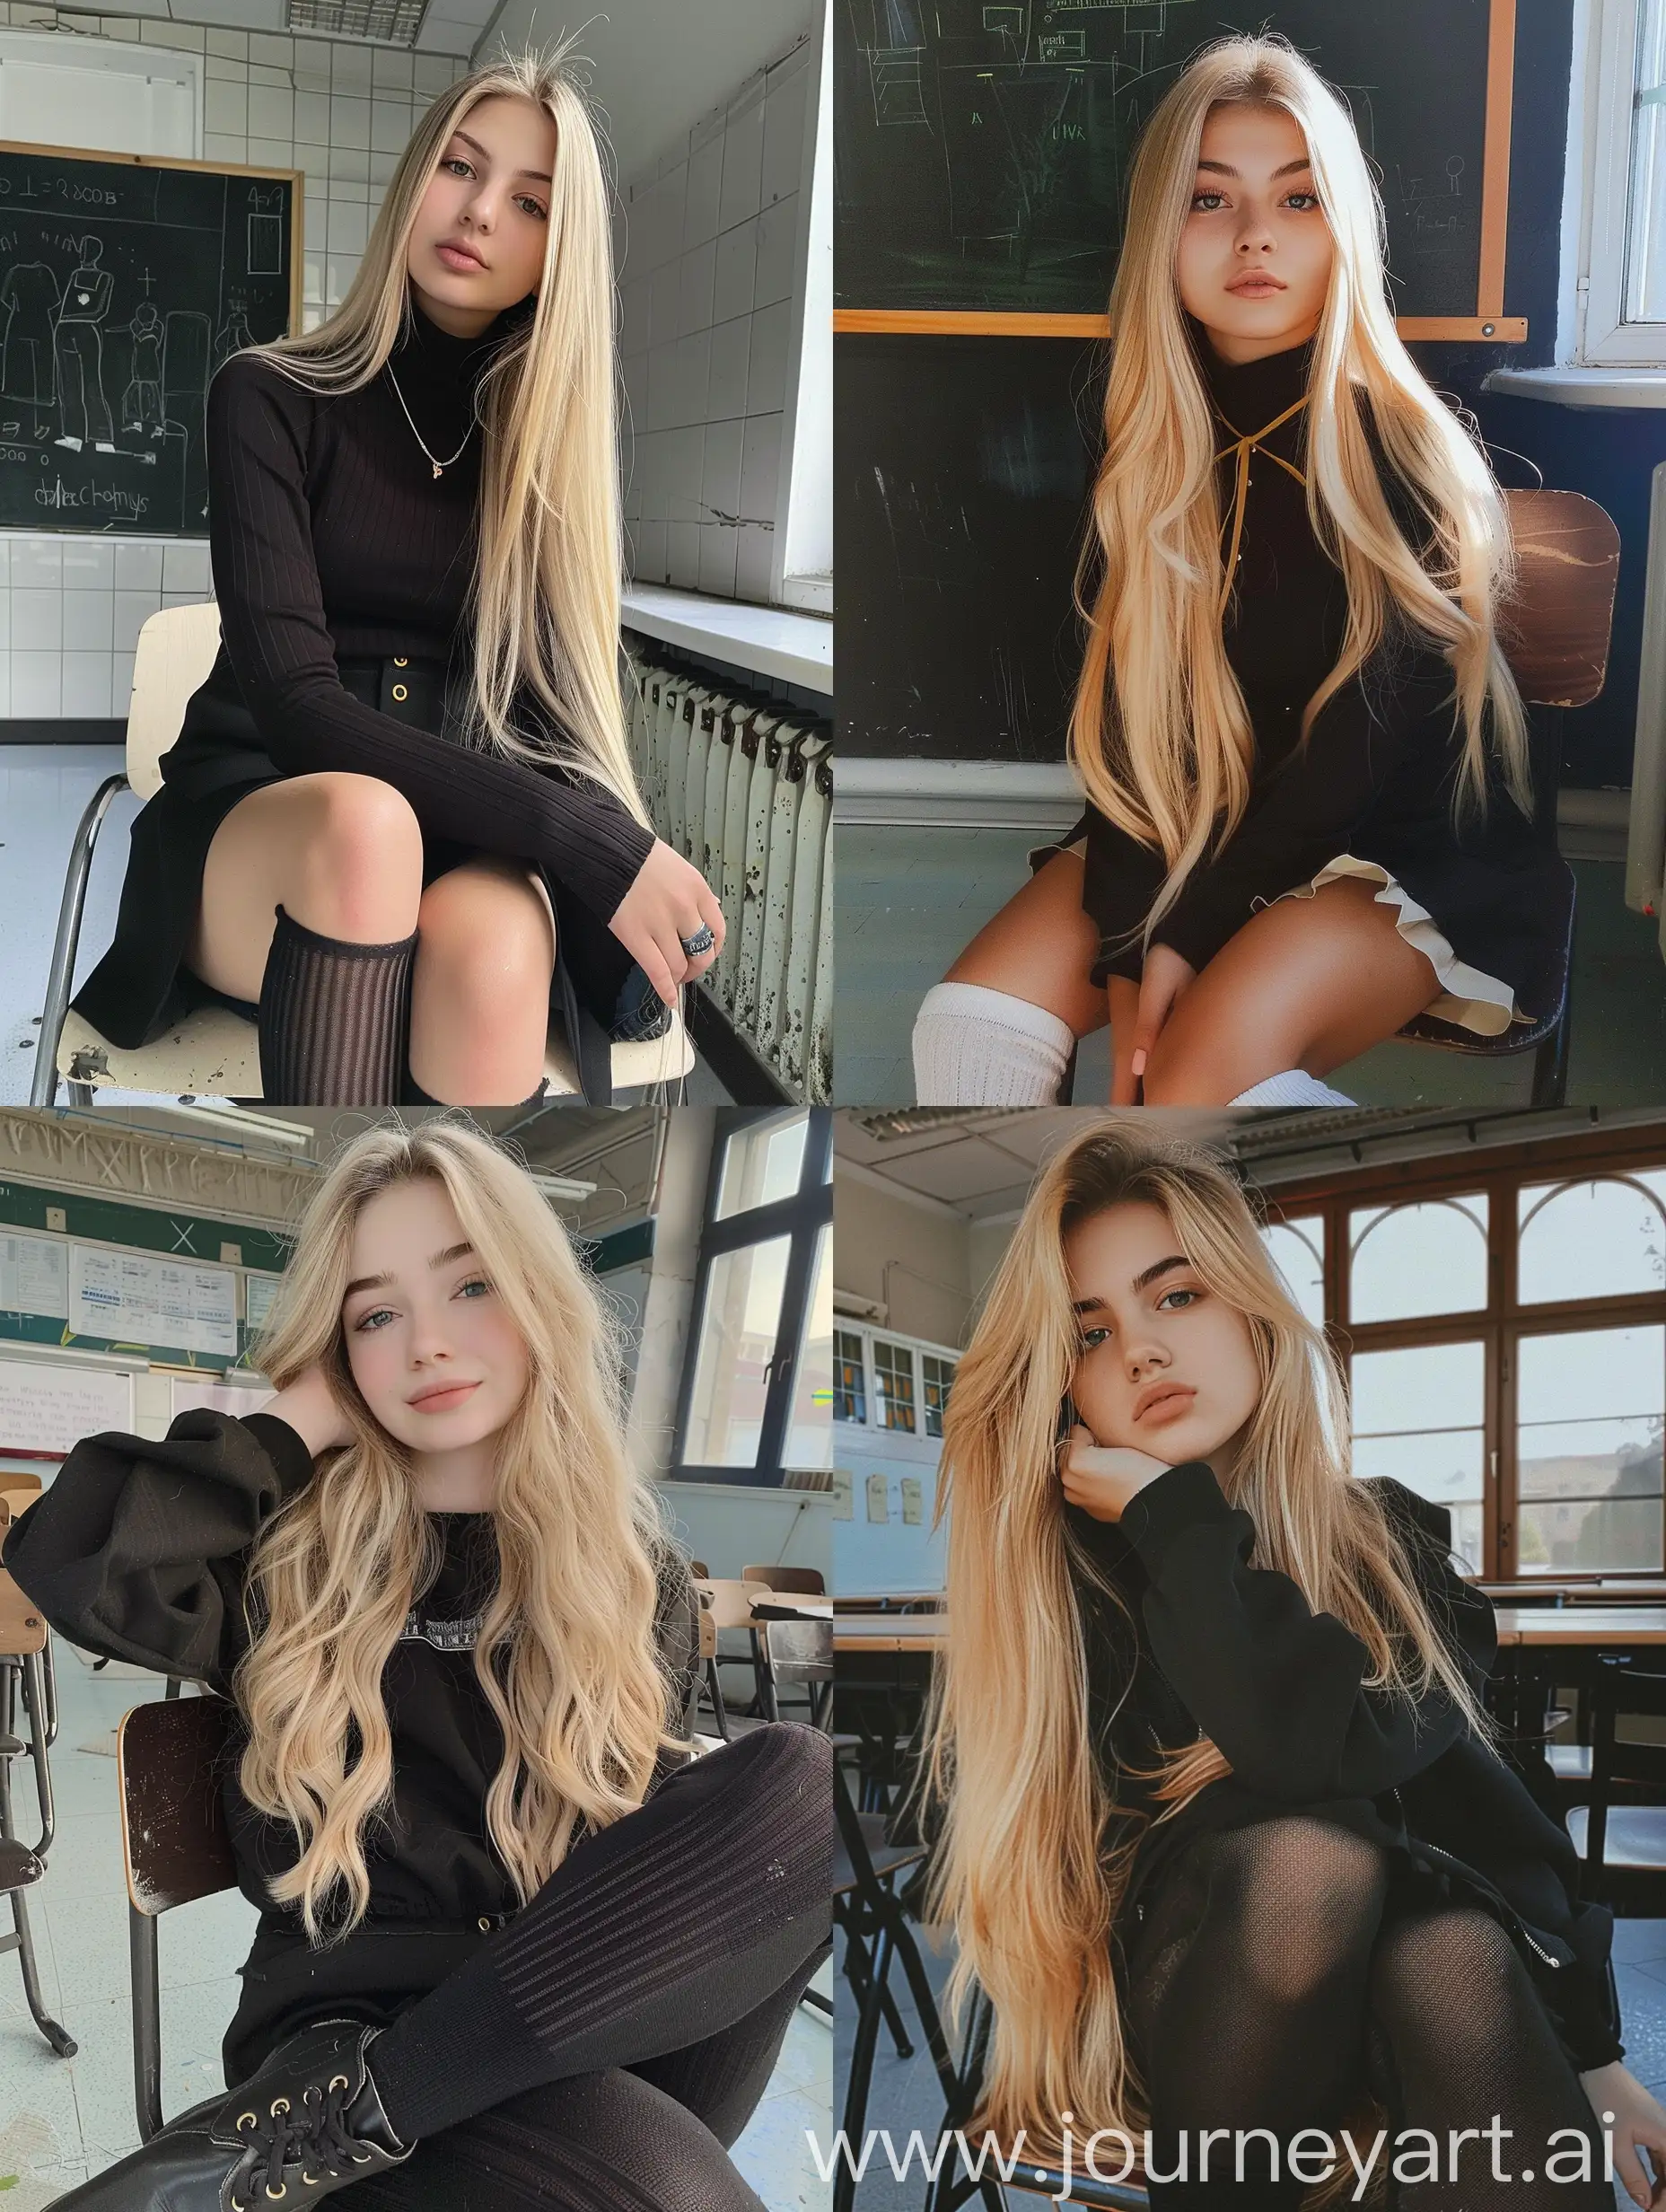 1 Ukrainian girl, long blond hair , 22 years old, influencer, beauty , in the school ,school black uniform , makeup, smiling, chão view, sitting on chair , socks and boots, no effect, selfie , iphone selfie, no filters , iphone photo natural